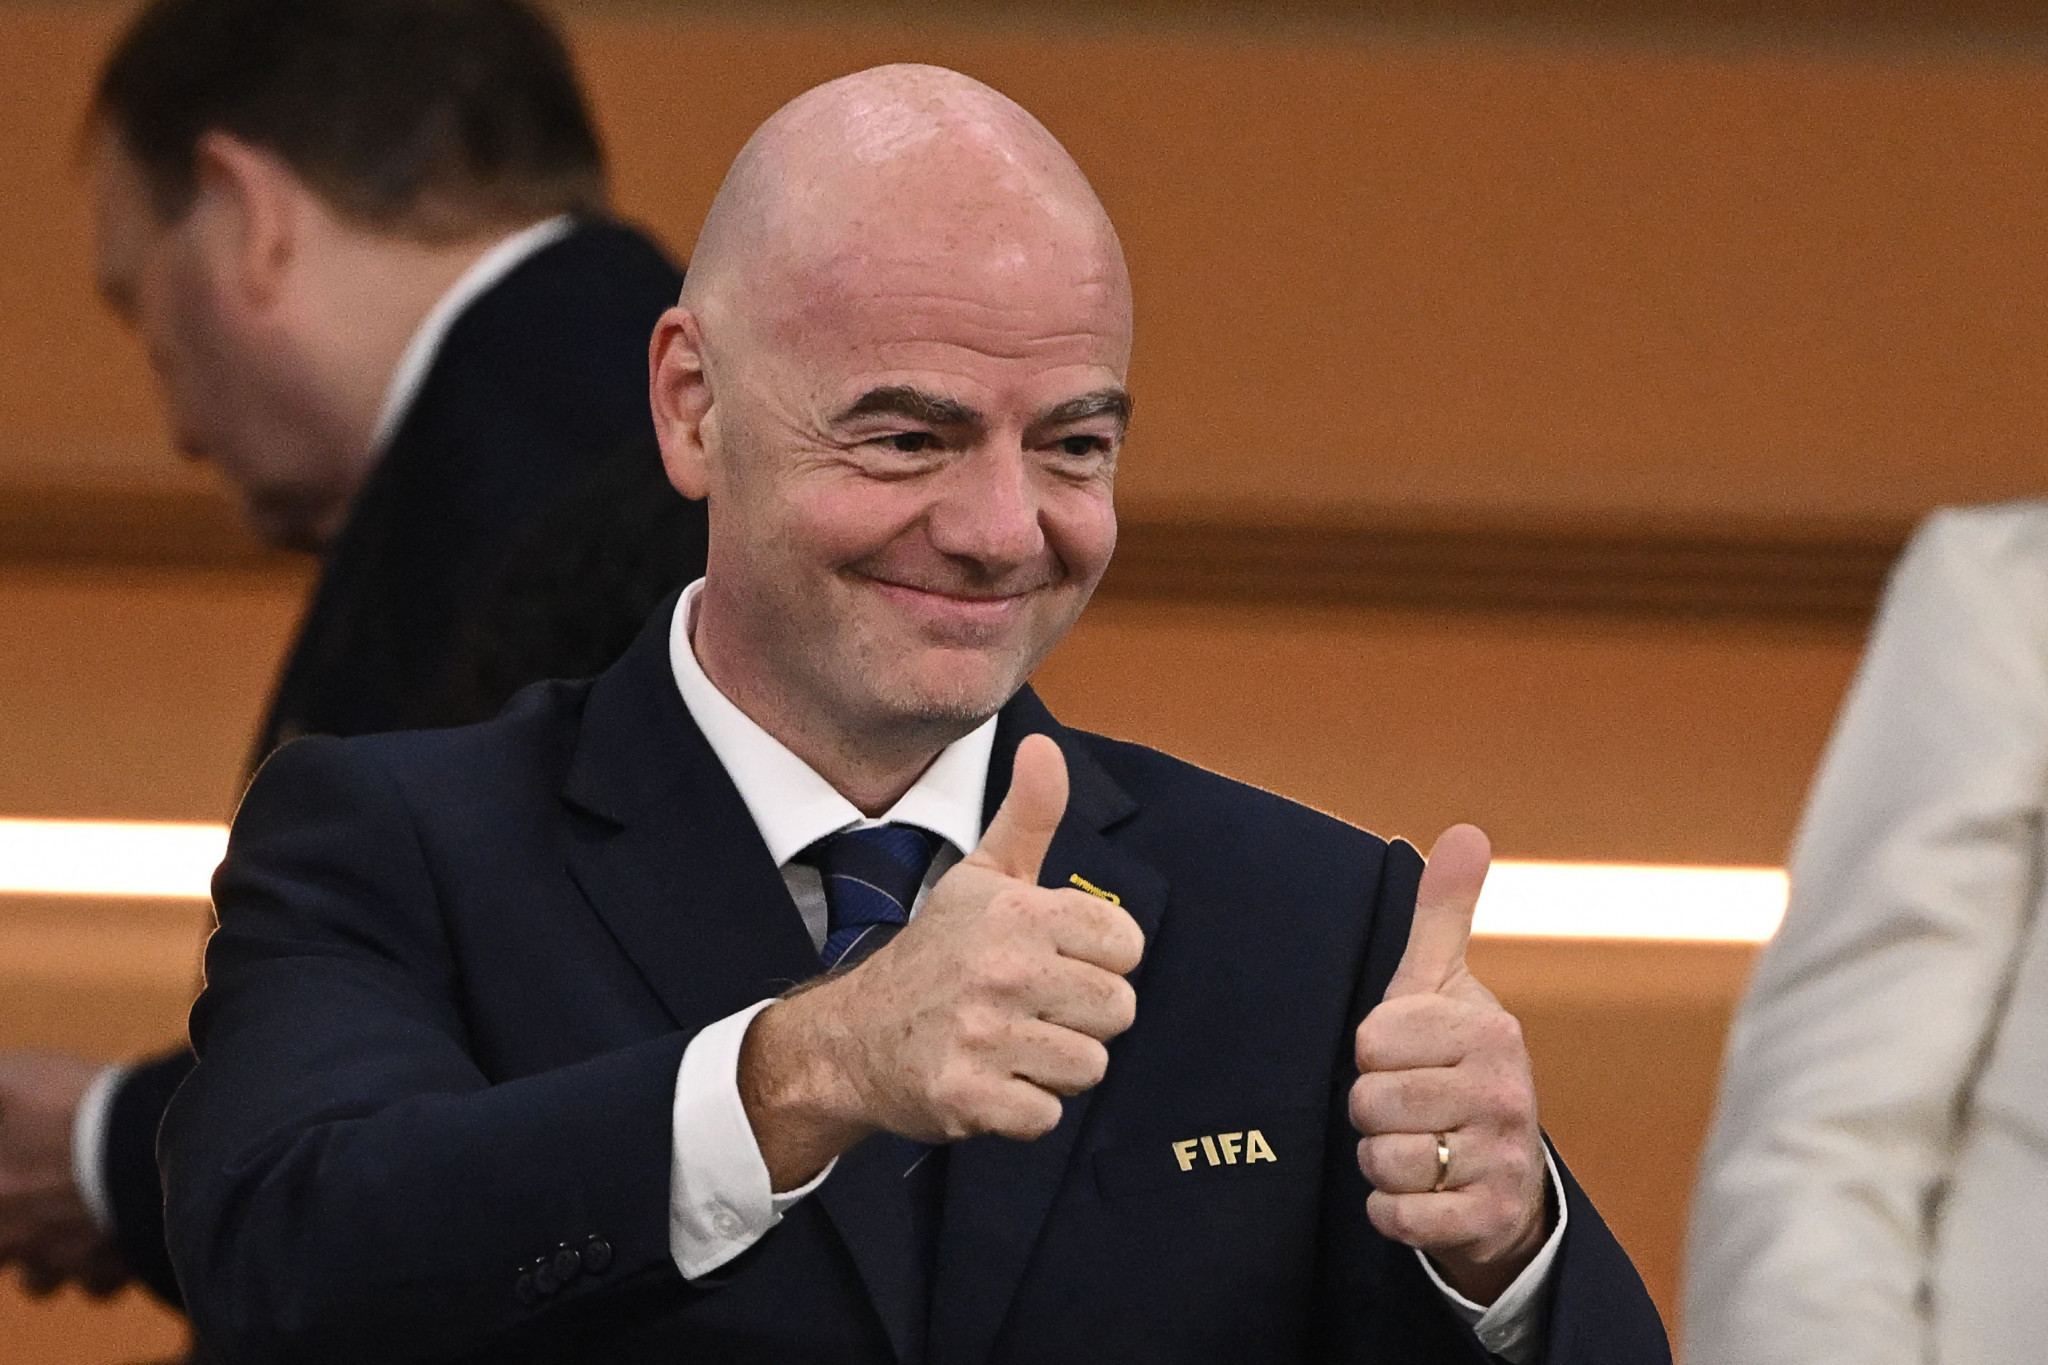 FIFA President Gianni Infantino argued "this has been the best group stage of a FIFA World Cup ever" ©Getty Images